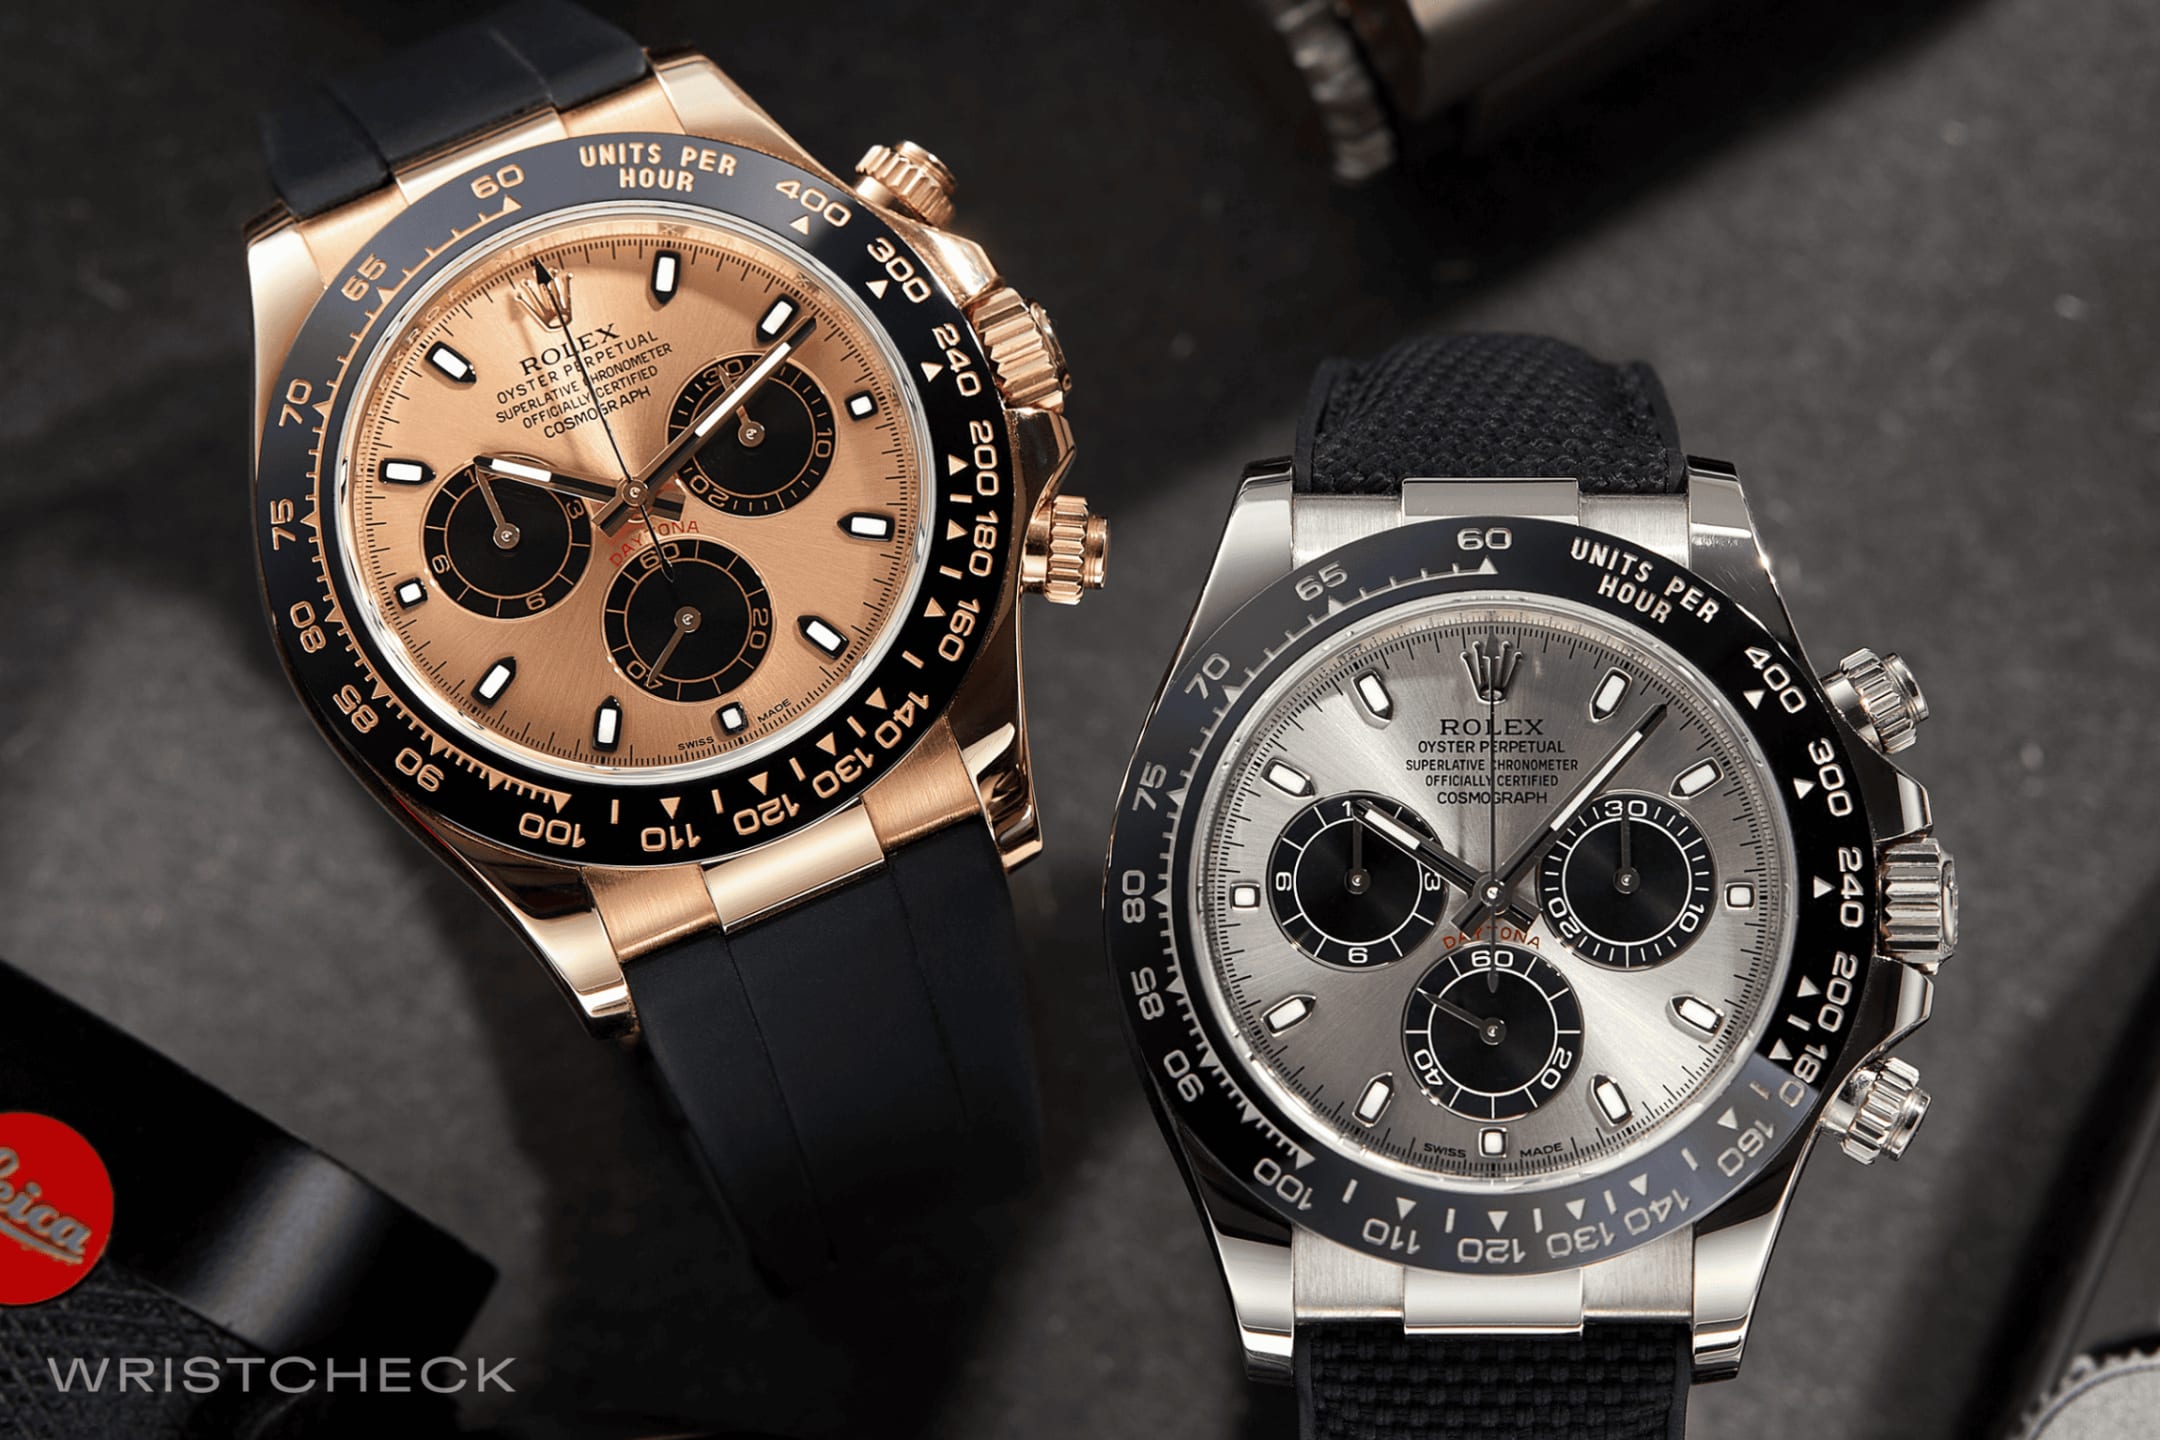 The Rolex Cosmograph Daytona in Rose Gold Ref. 116515LN-0013, and the Daytona White Gold Oysterflex Silver Dial Ref. 116519LN-0027, both feature the calibre 4130